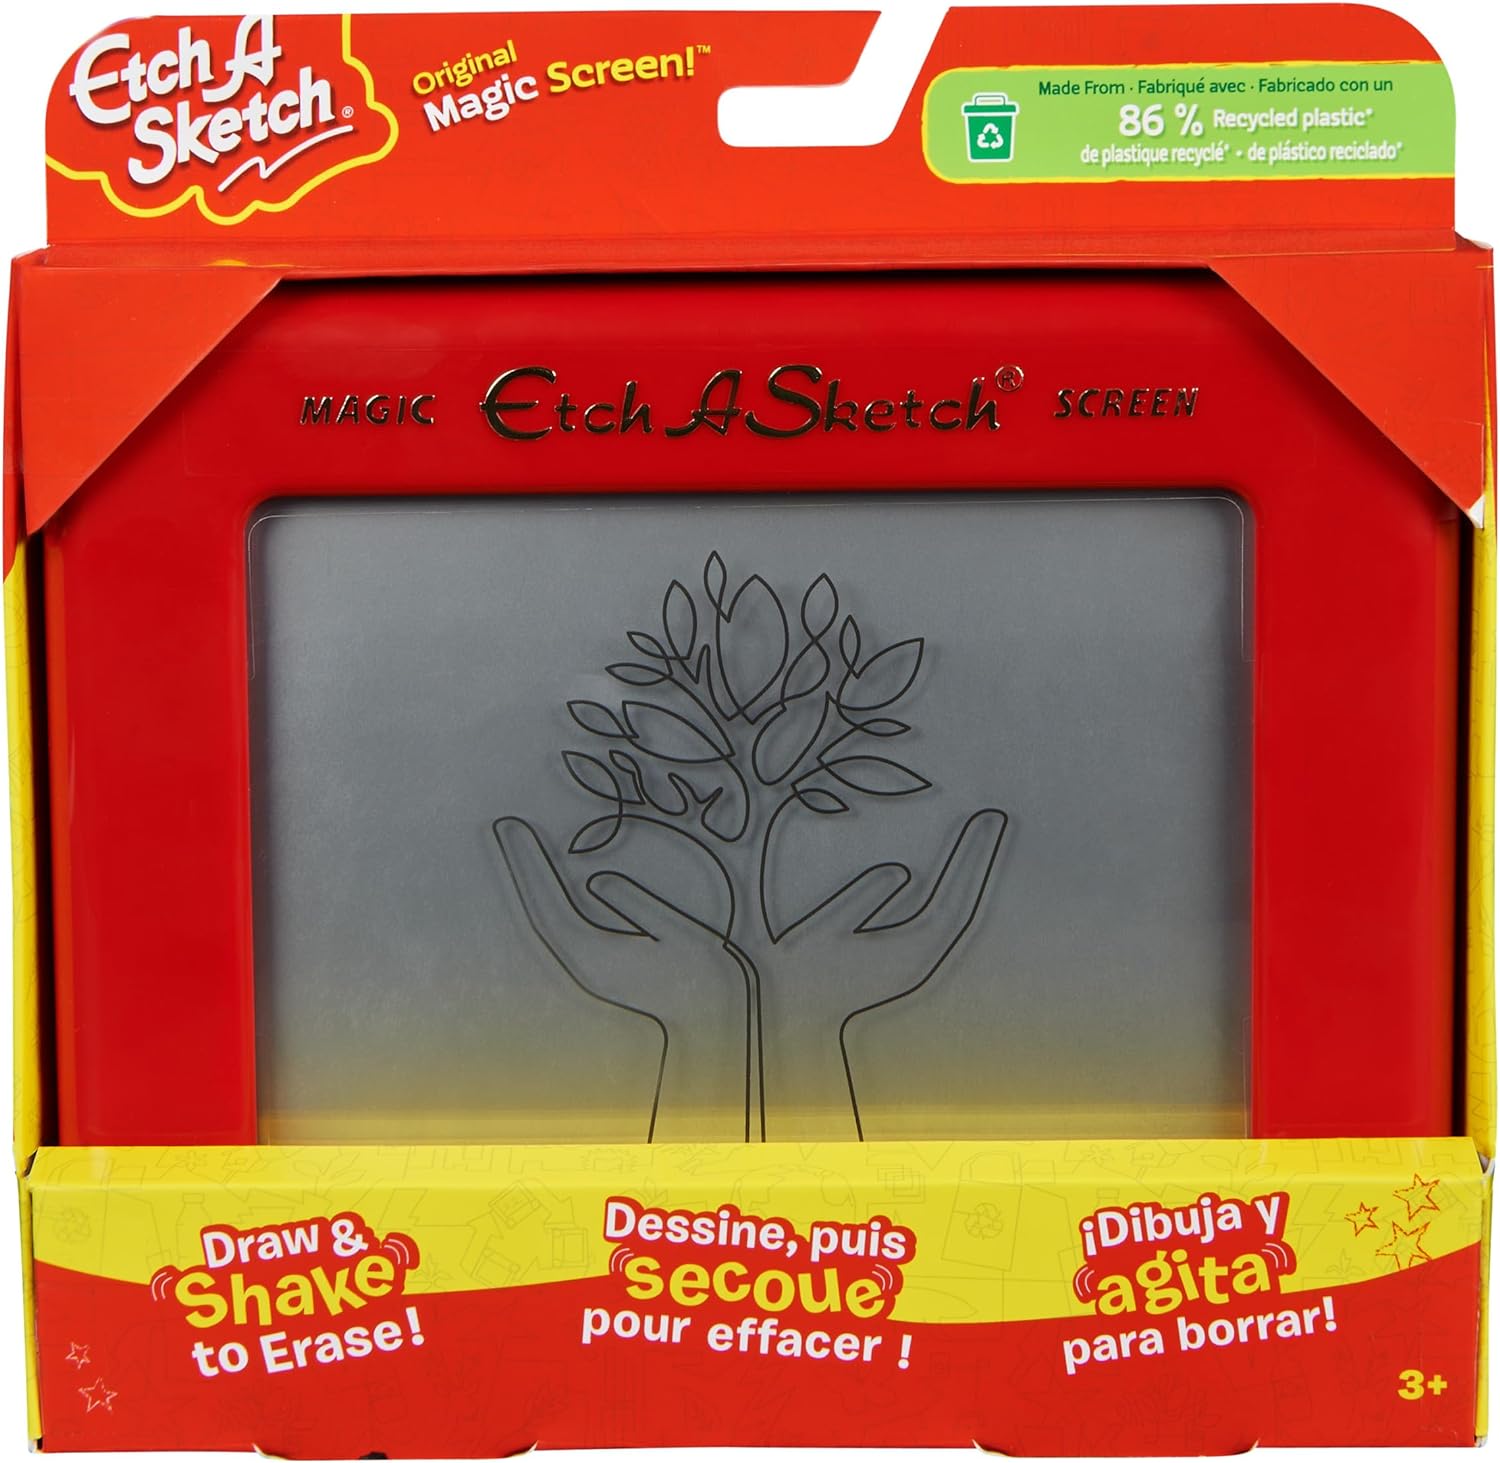 Etch-A-Sketch by Spinmaster #6066719